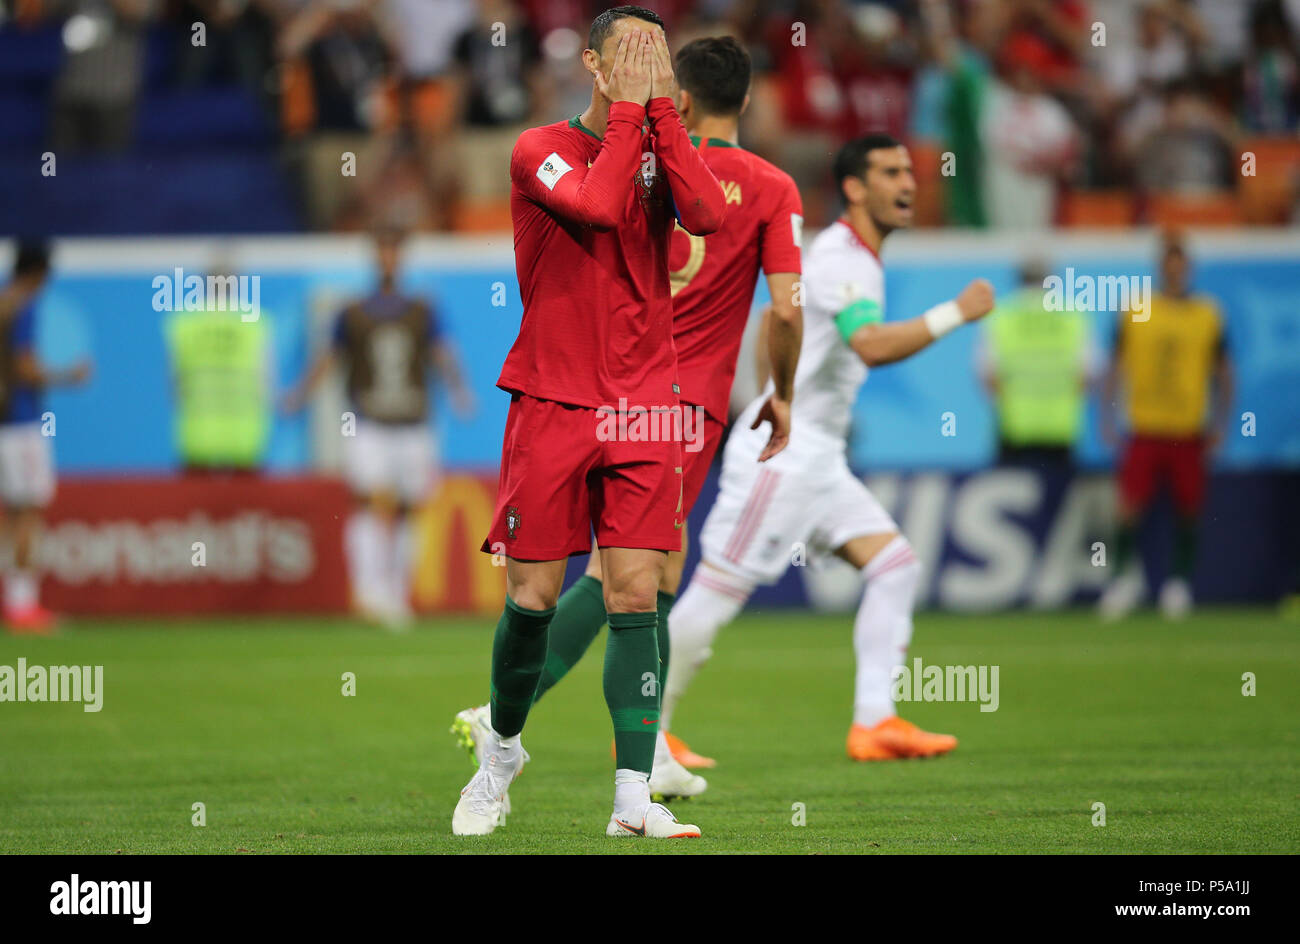 Saransk, Russia. 25th Jun, 2018. CRISTIANO RONALDO WRONG PENALTY  in  the Fifa World Cup Russia 2018, Group B, football match between IRAN V PORTUGAL  in MORDOVIA ARENA STADIUM in SARANSK. Credit: marco iacobucci/Alamy Live News Stock Photo